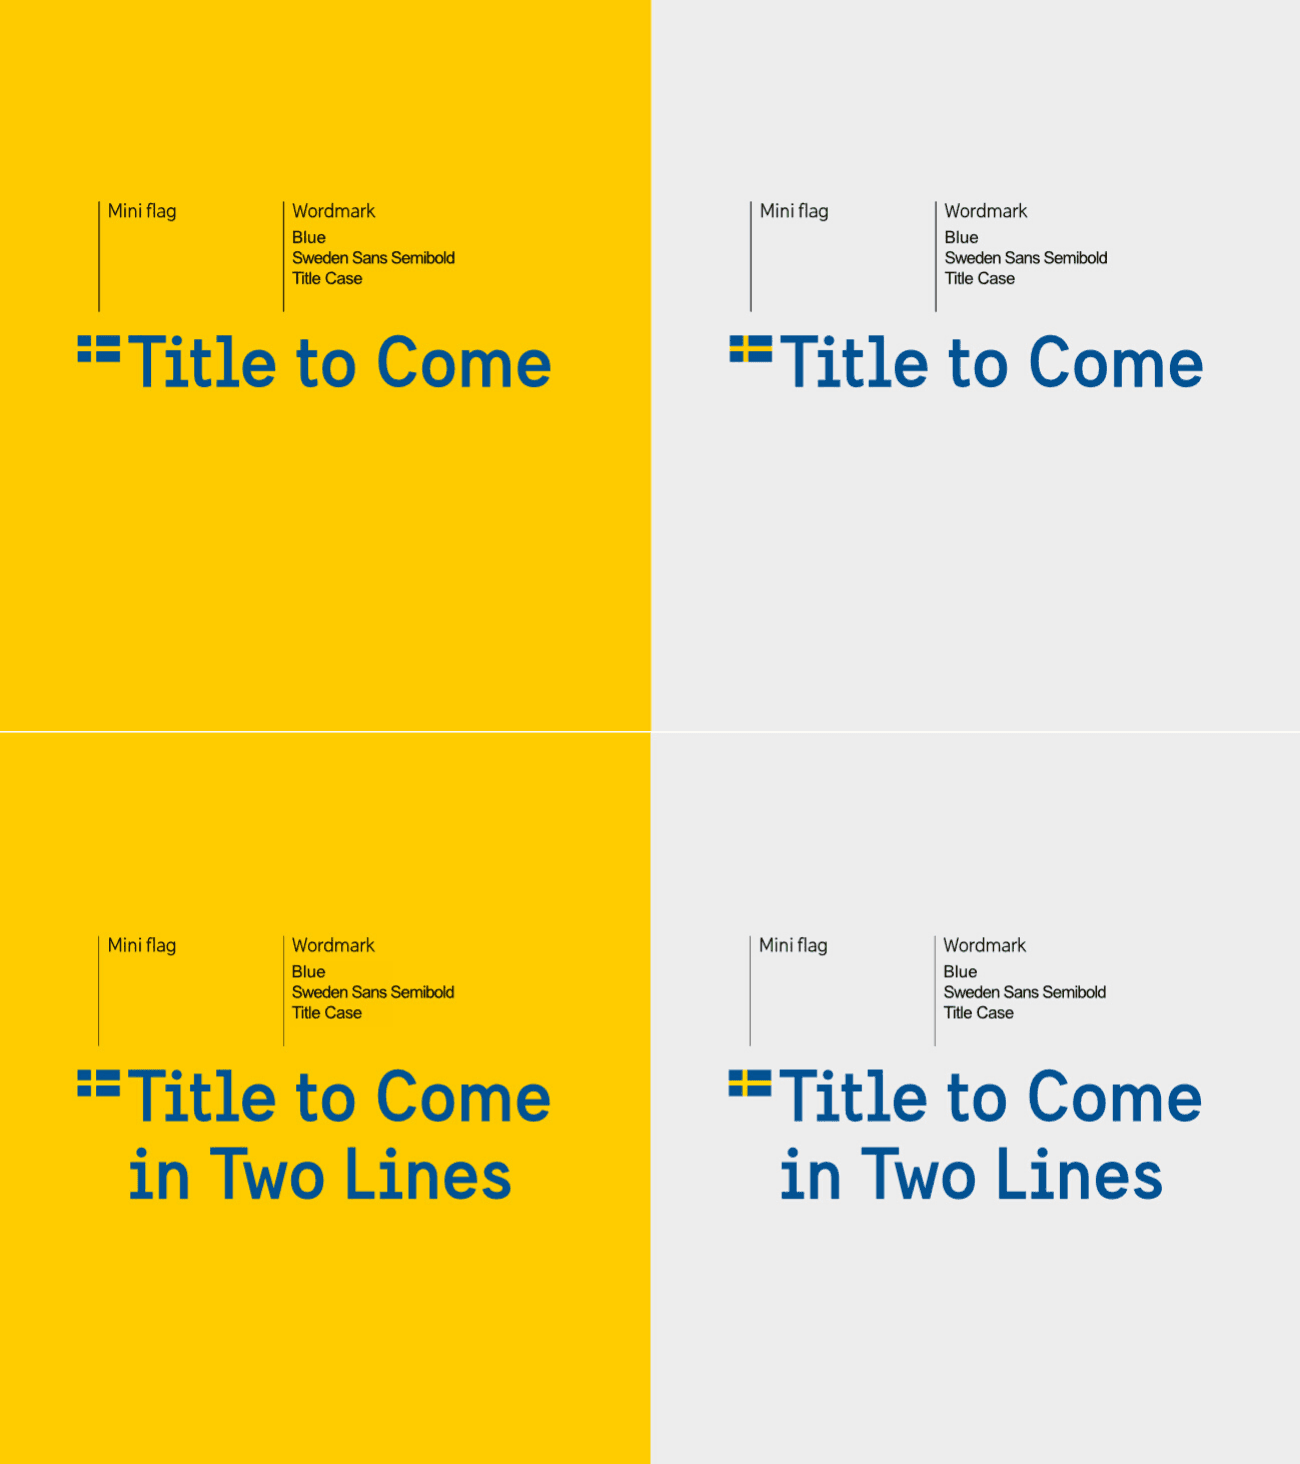 Template for construction of logotype on yellow and light grey background, respectively.